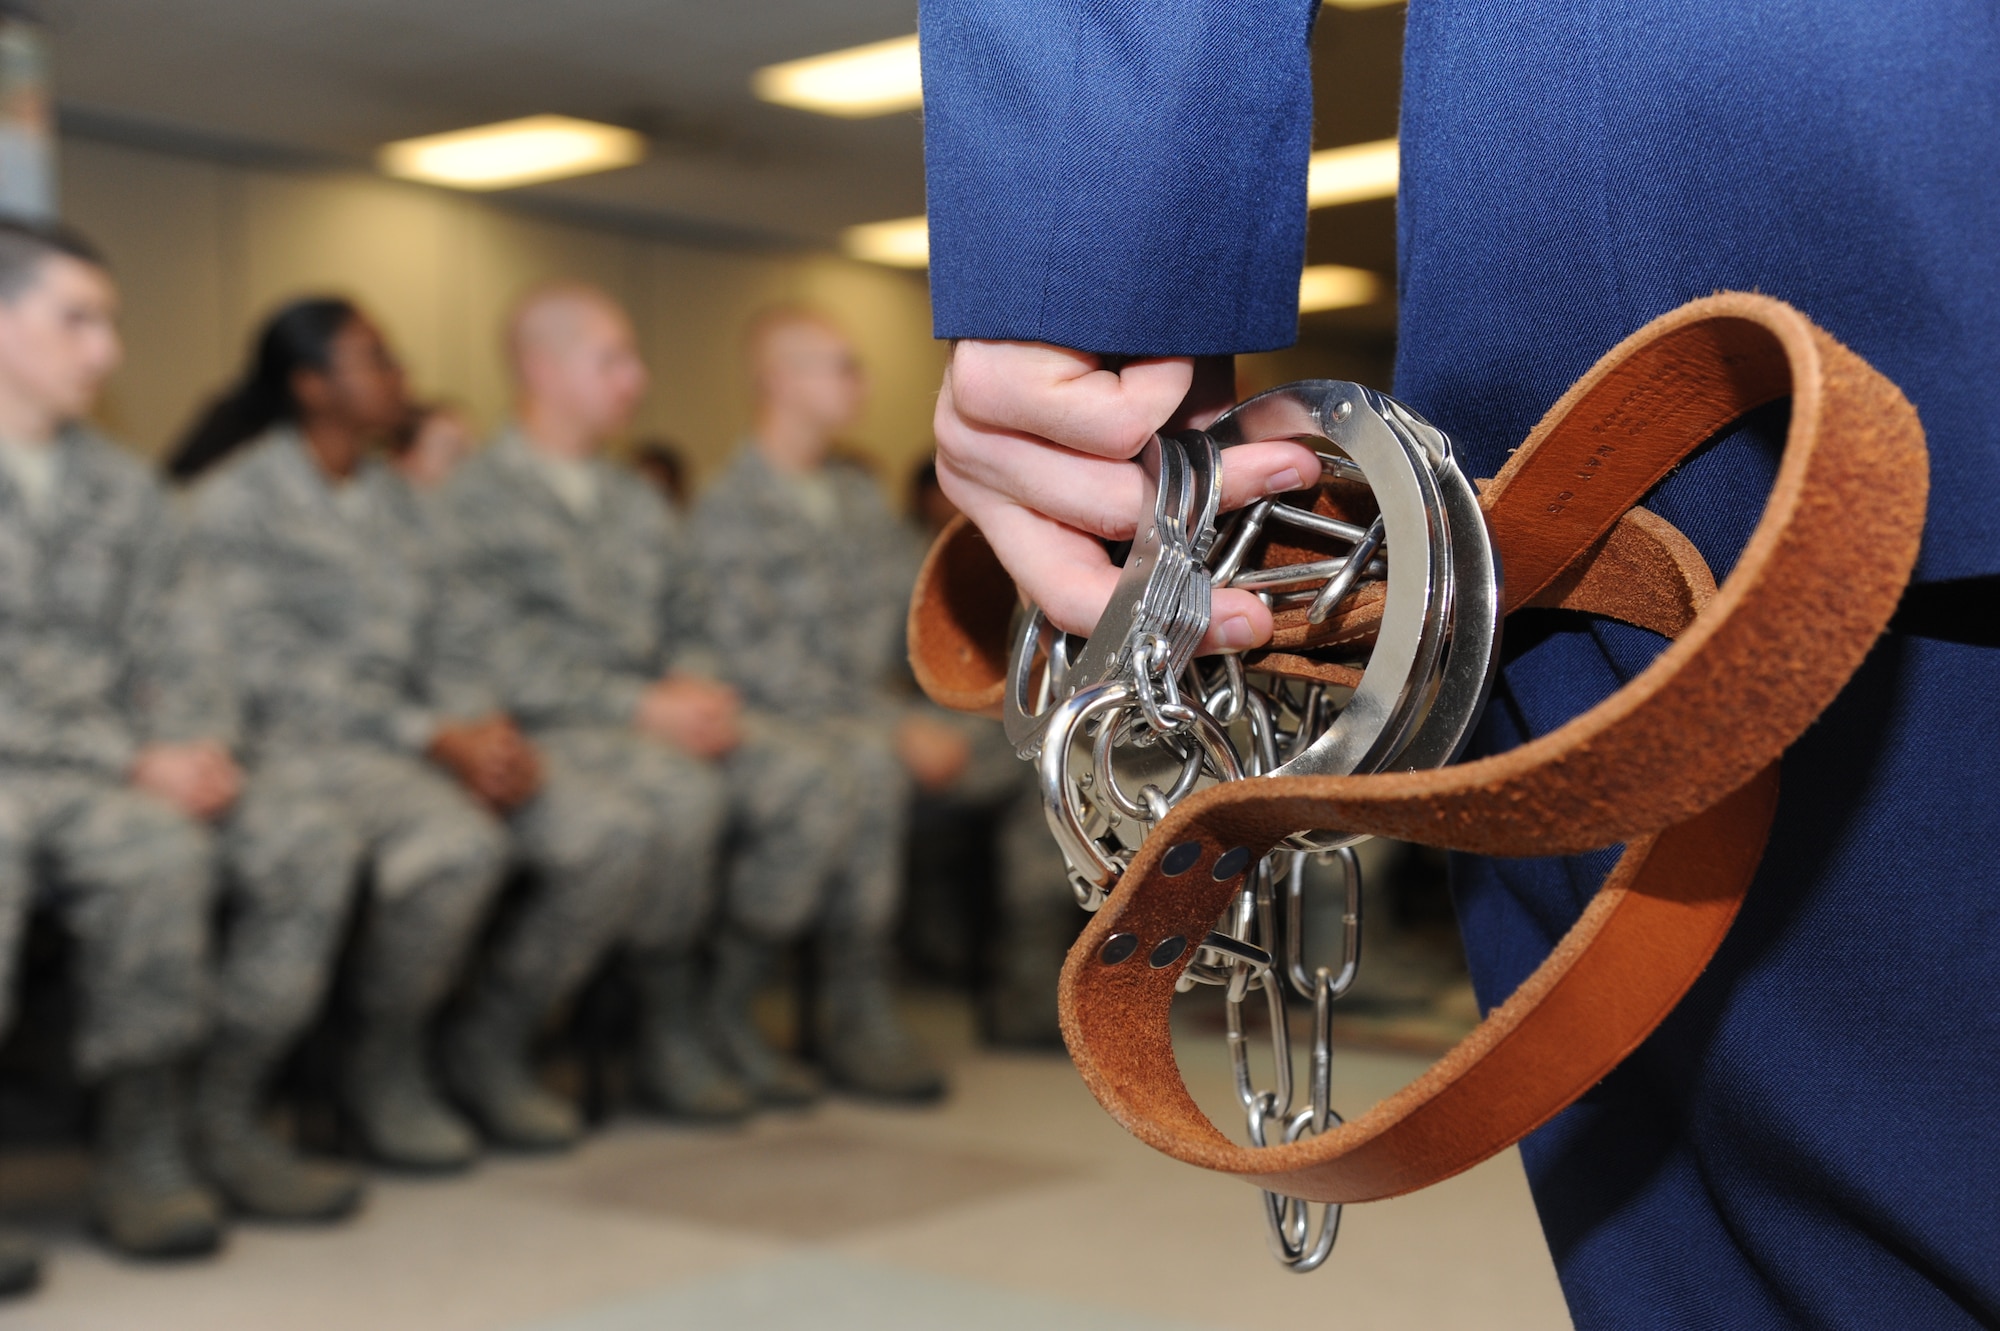 Staff Sgt. Christopher Vroman, 334th Training Squadron combat controller, stands ready with a pair of shackles in hand to place on the defendant following sentencing during a summary court martial Feb. 8, 2013, at the Levitow Training Support Facility, Keesler Air Force Base, Miss.  Mobile summary courts martial set an example for new Airmen about consequences of their actions by quickly imposing good order and discipline.  (U.S. Air Force photo by Kemberly Groue)